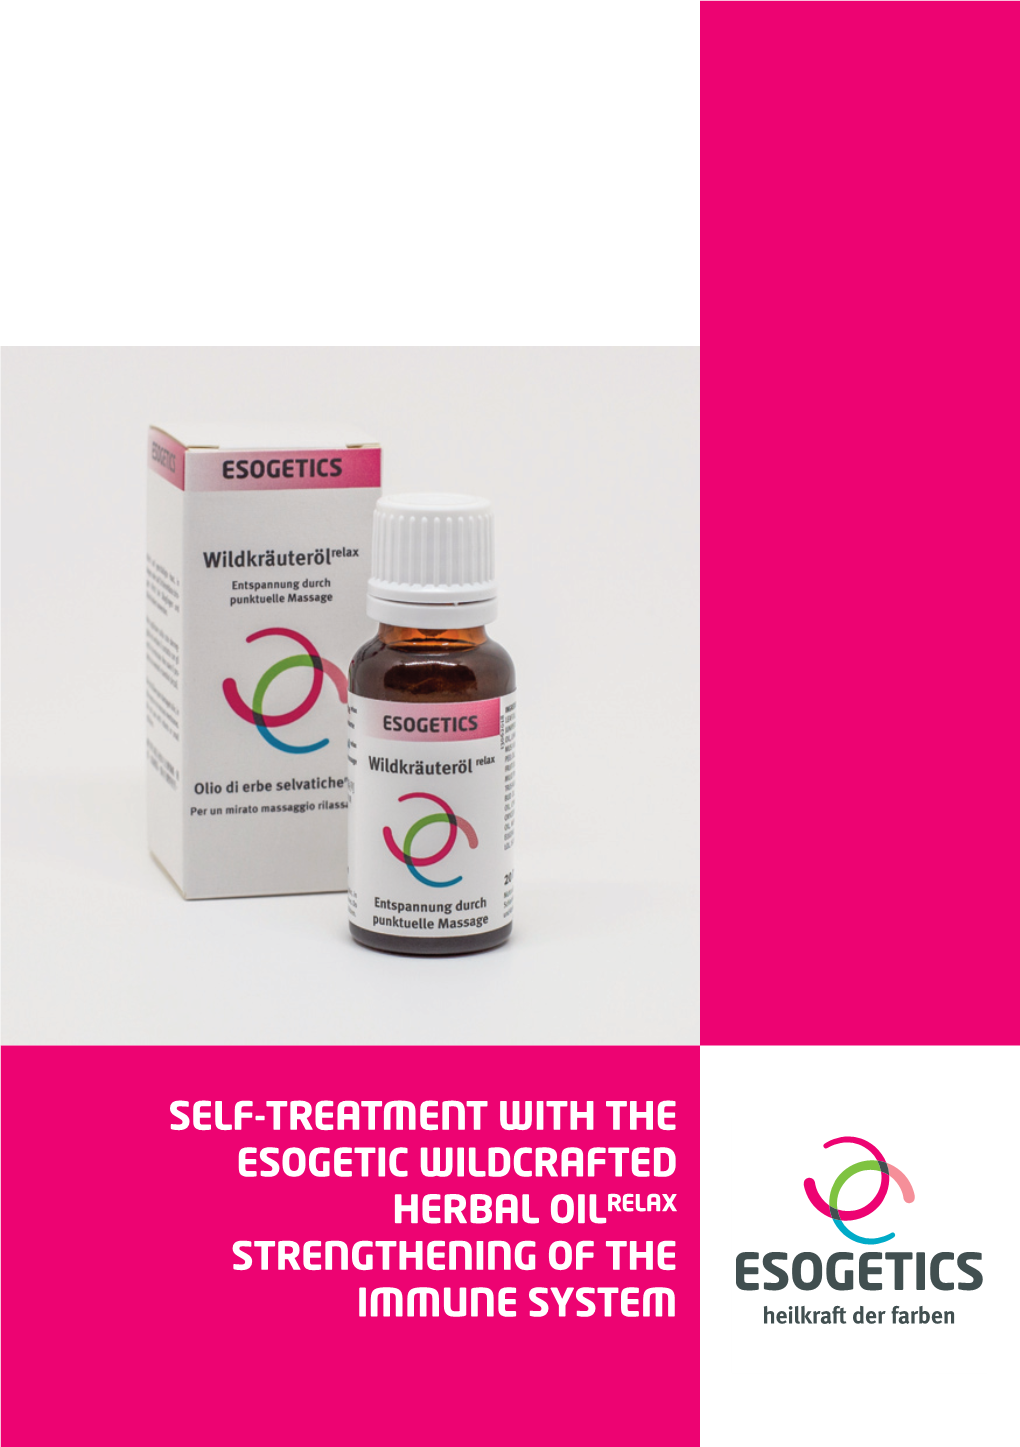 Self-Treatment with the Esogetic Wildcrafted Herbal Oilrelax Strengthening of the Immune System